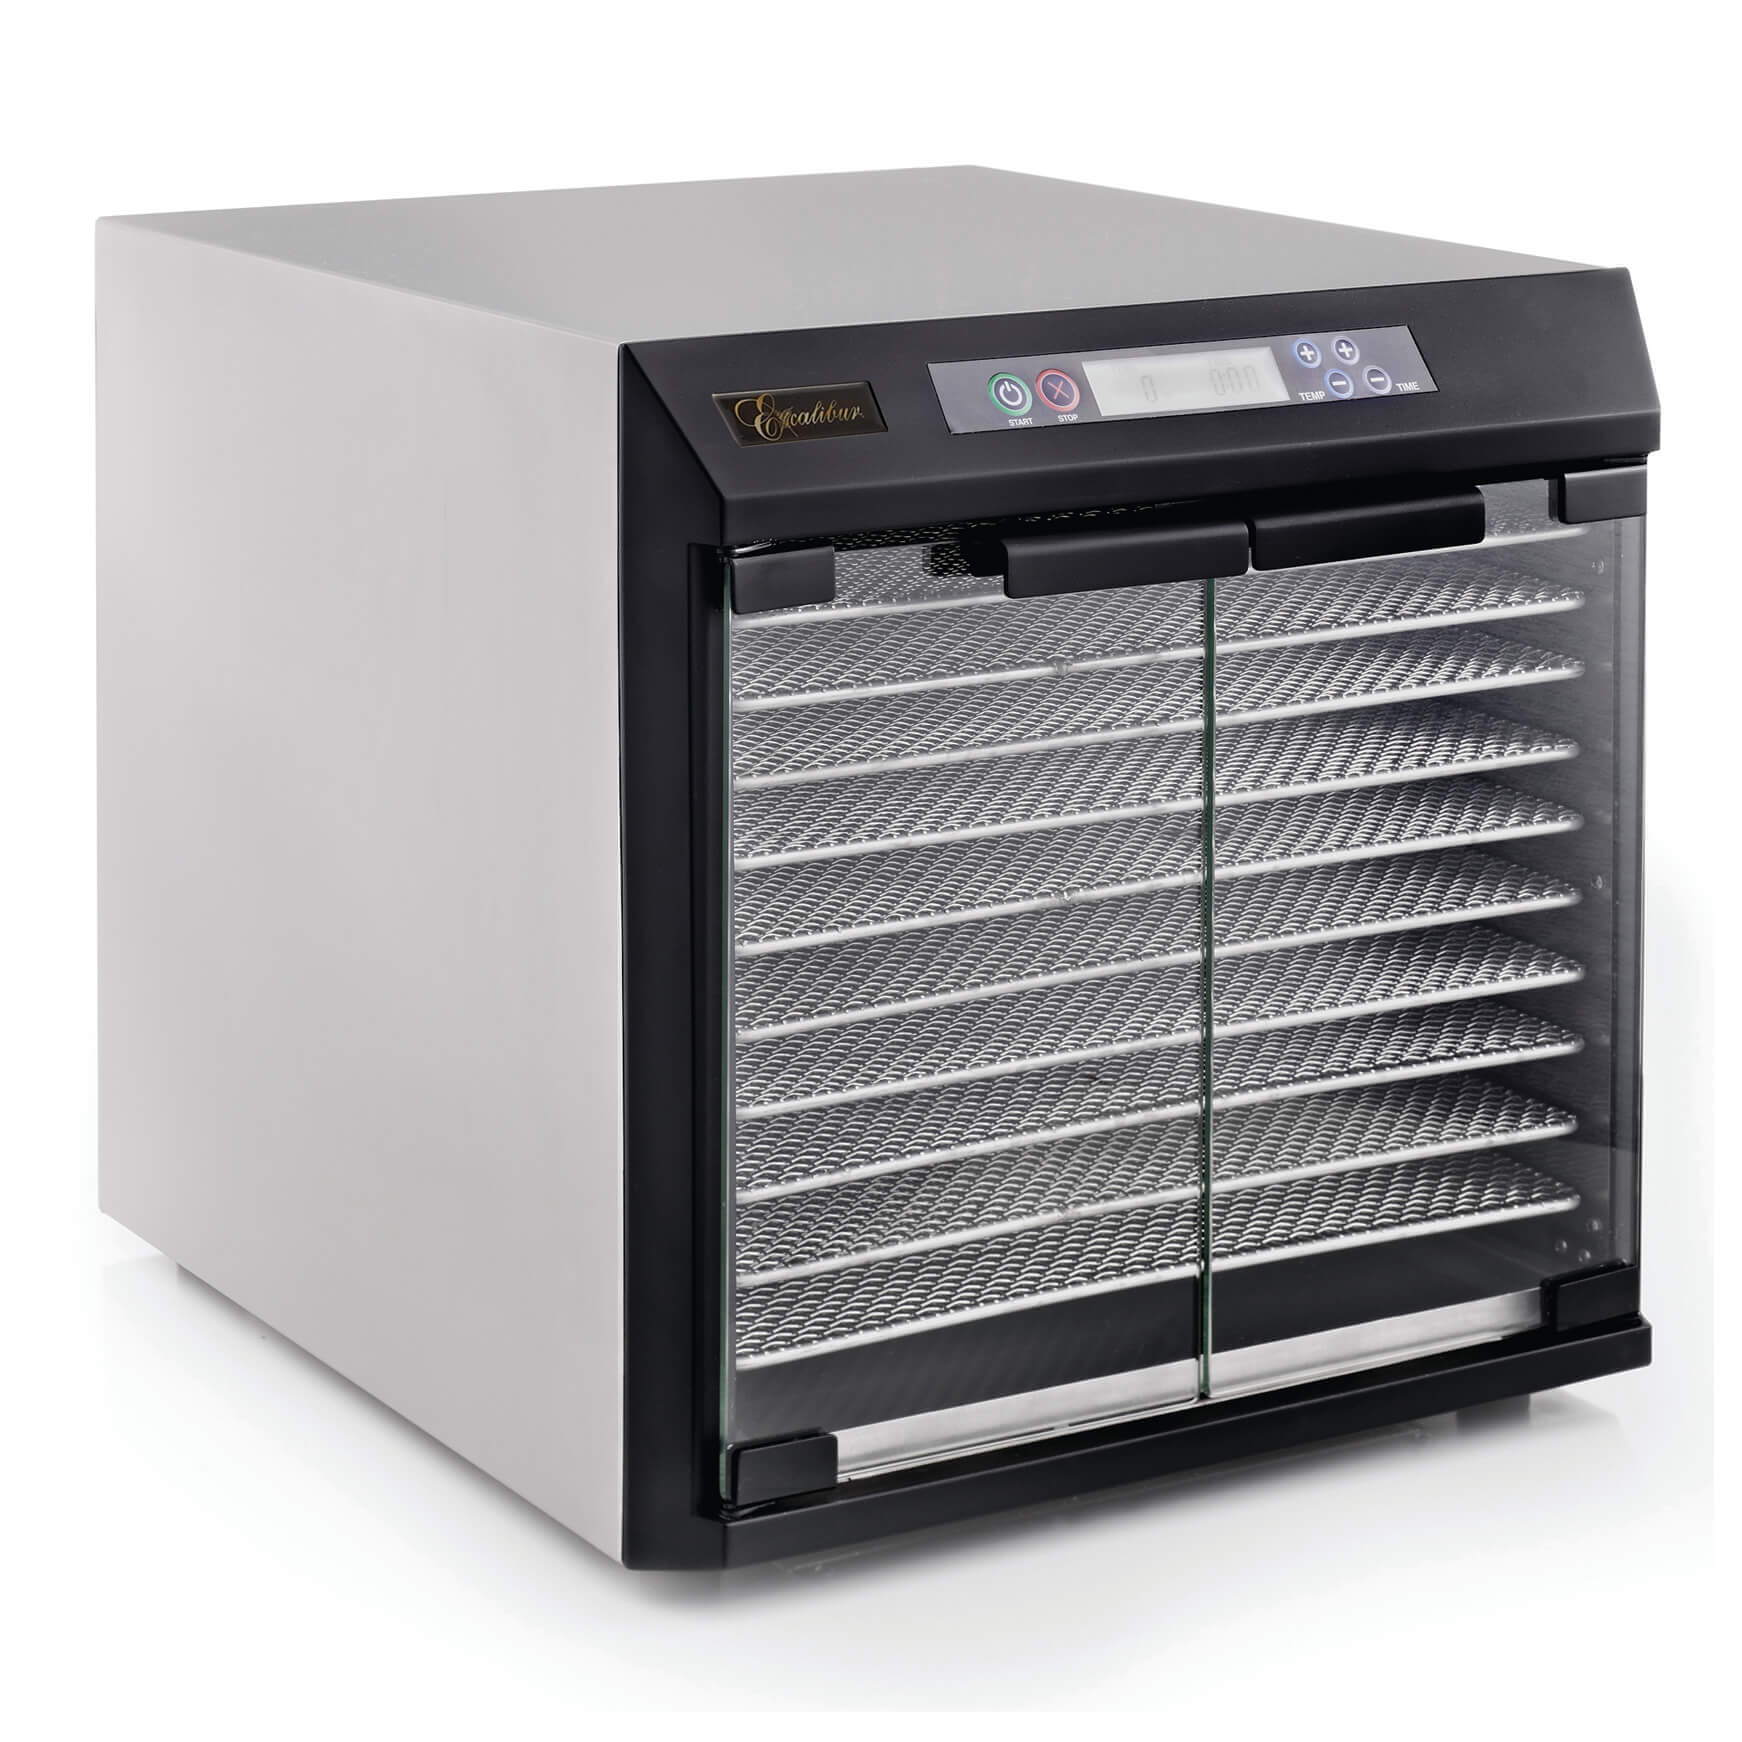 Excalibur EXC10EL 10 tray stainless steel dehydrator with armoured glass doors closed.